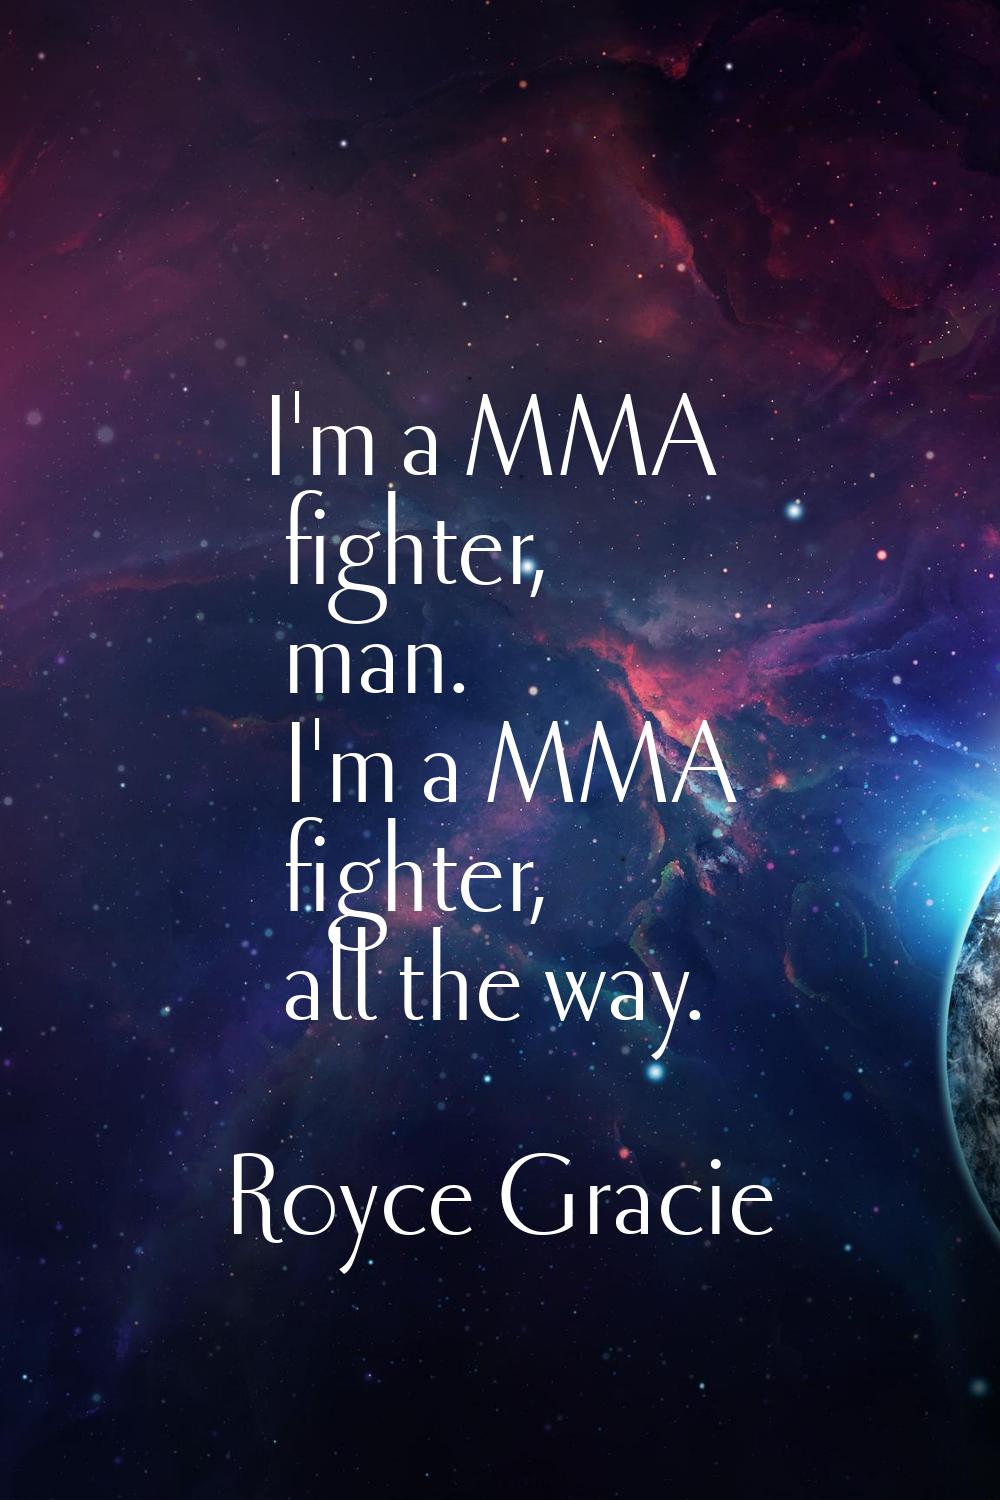 I'm a MMA fighter, man. I'm a MMA fighter, all the way.